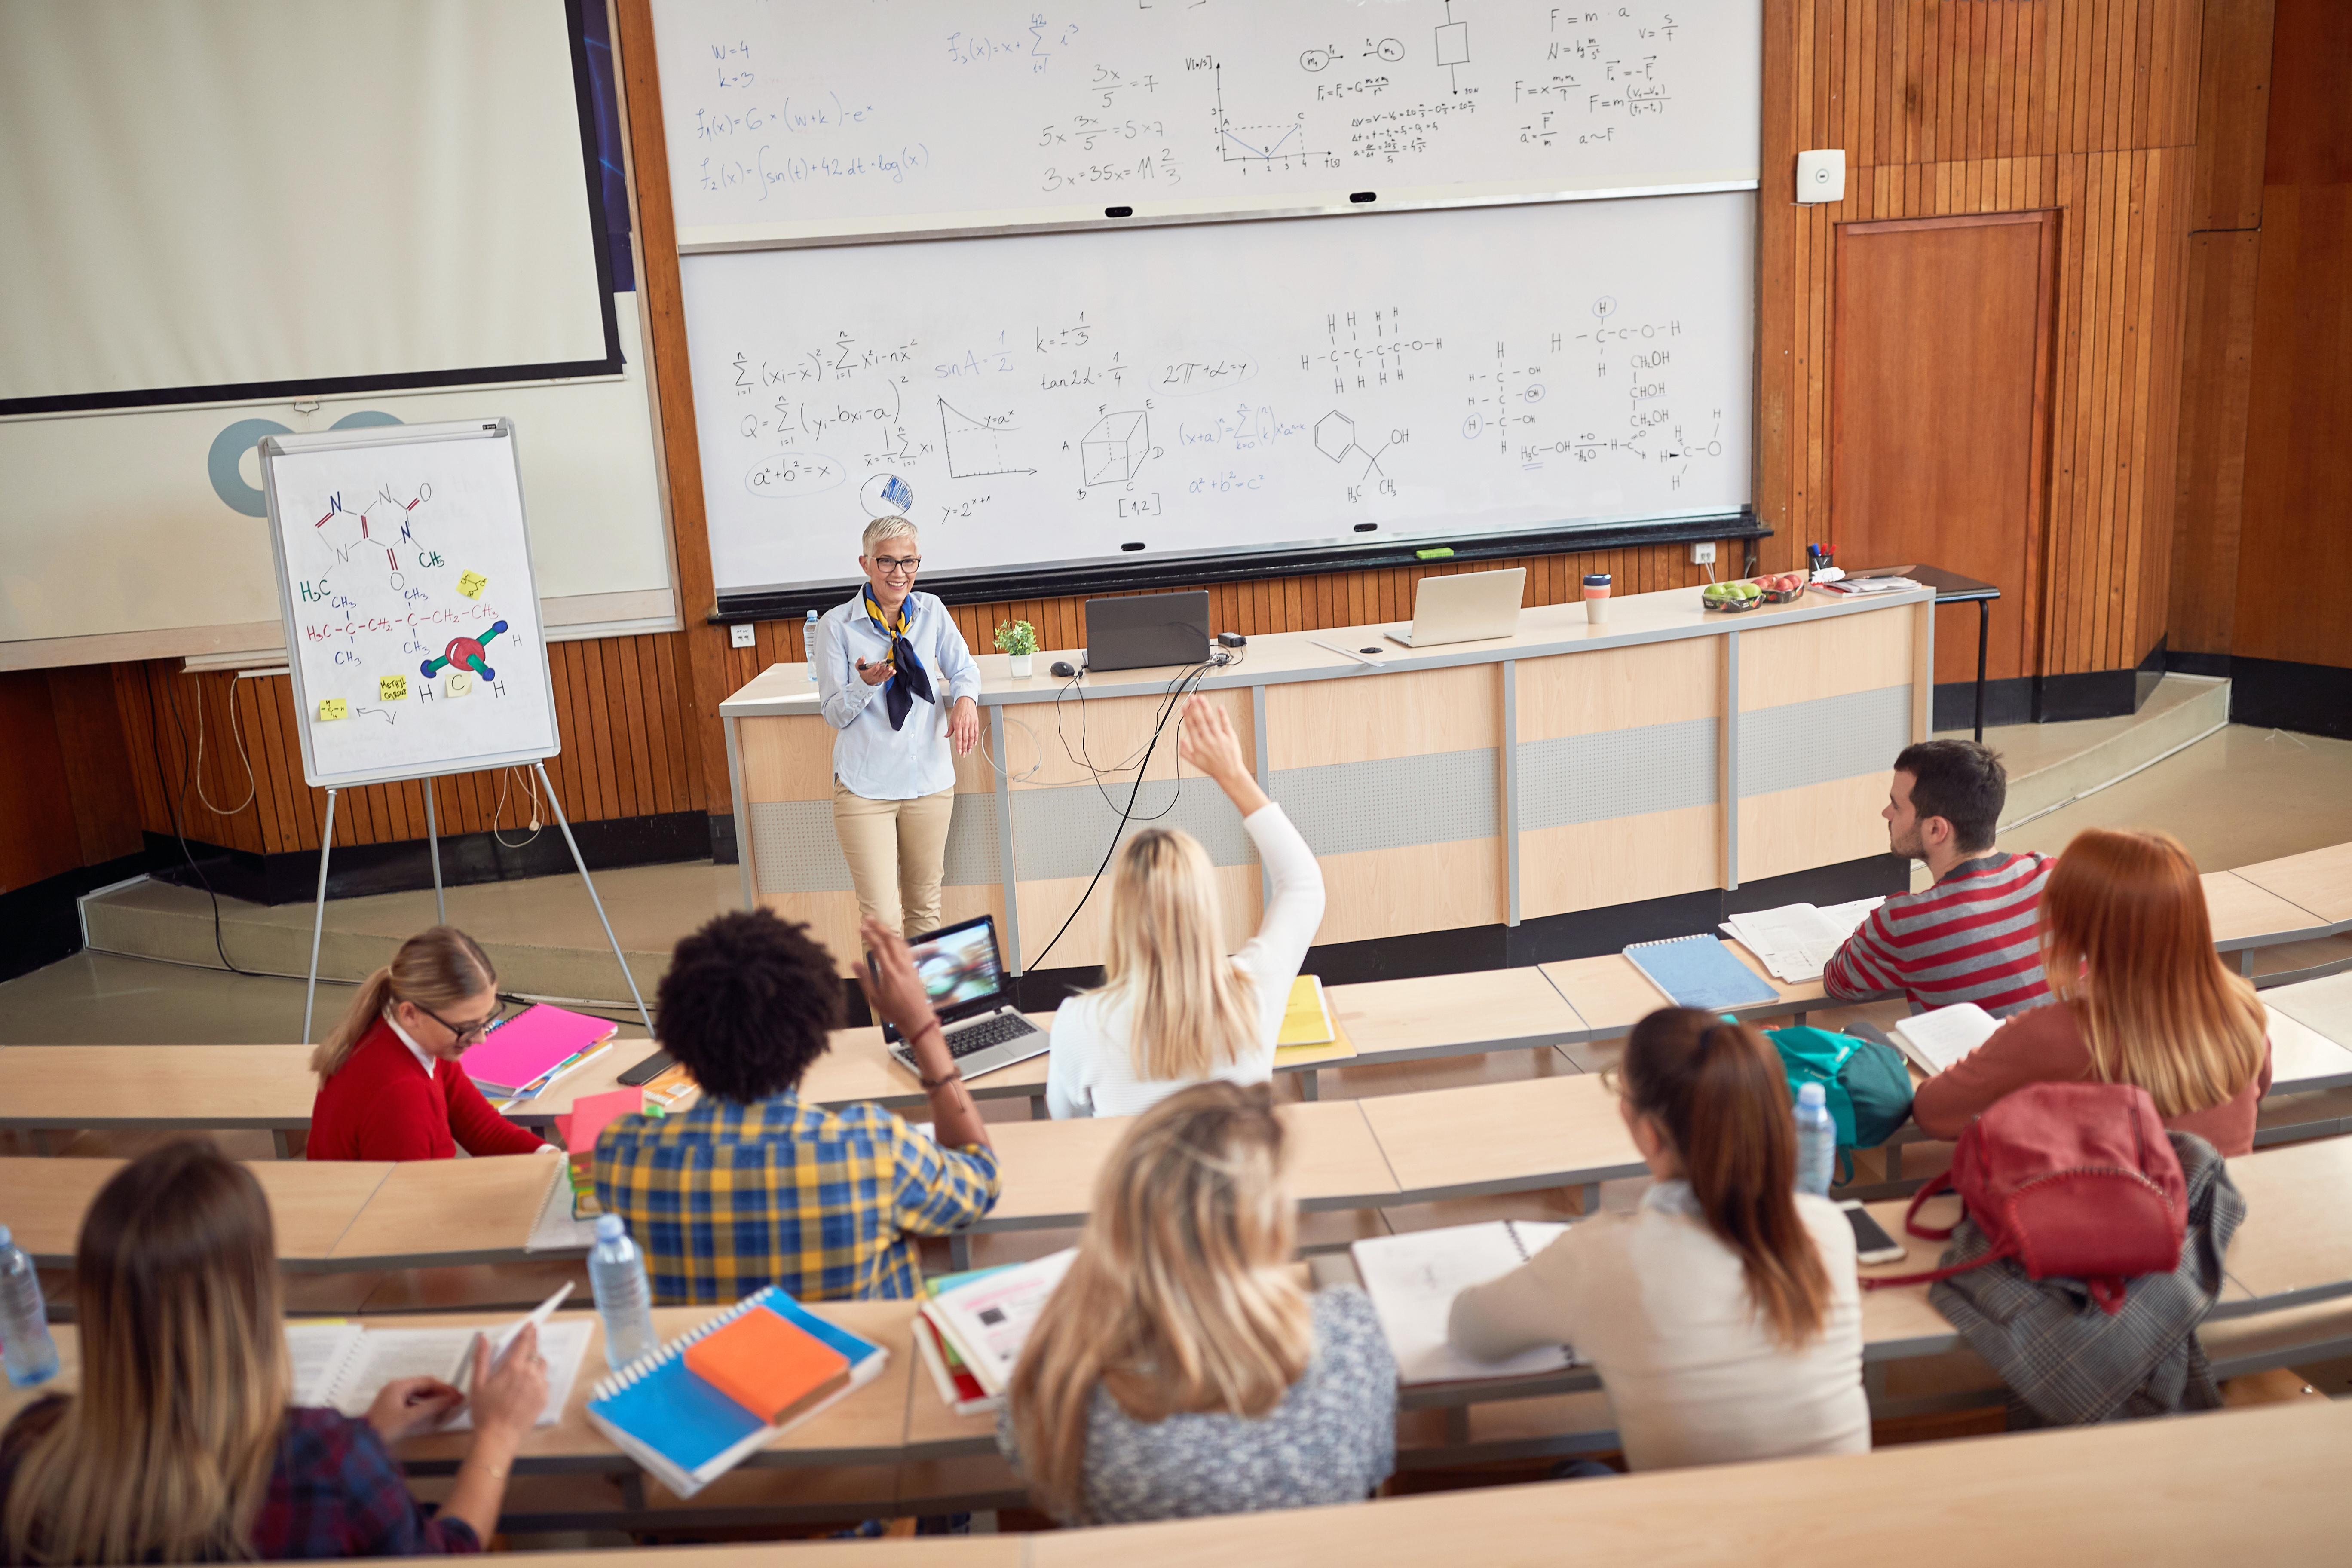 A professor with students in the lecture hall  | Source: Shutterstock